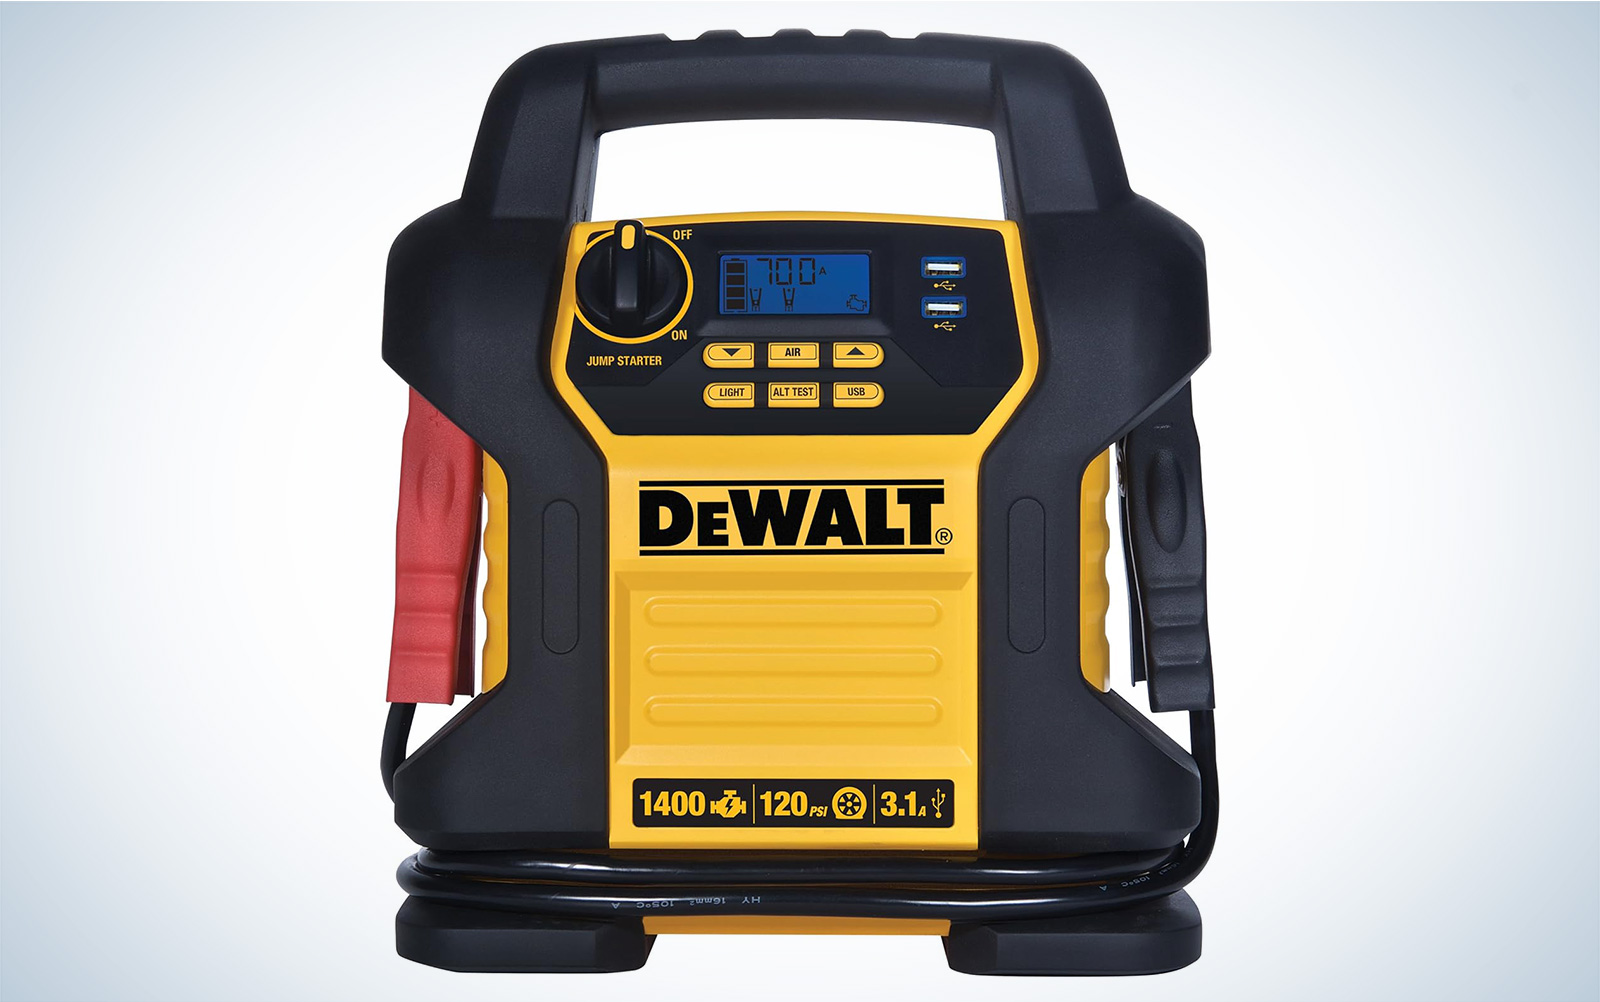 DeWalt power bank jump starter with its clamps folded in on a plain background